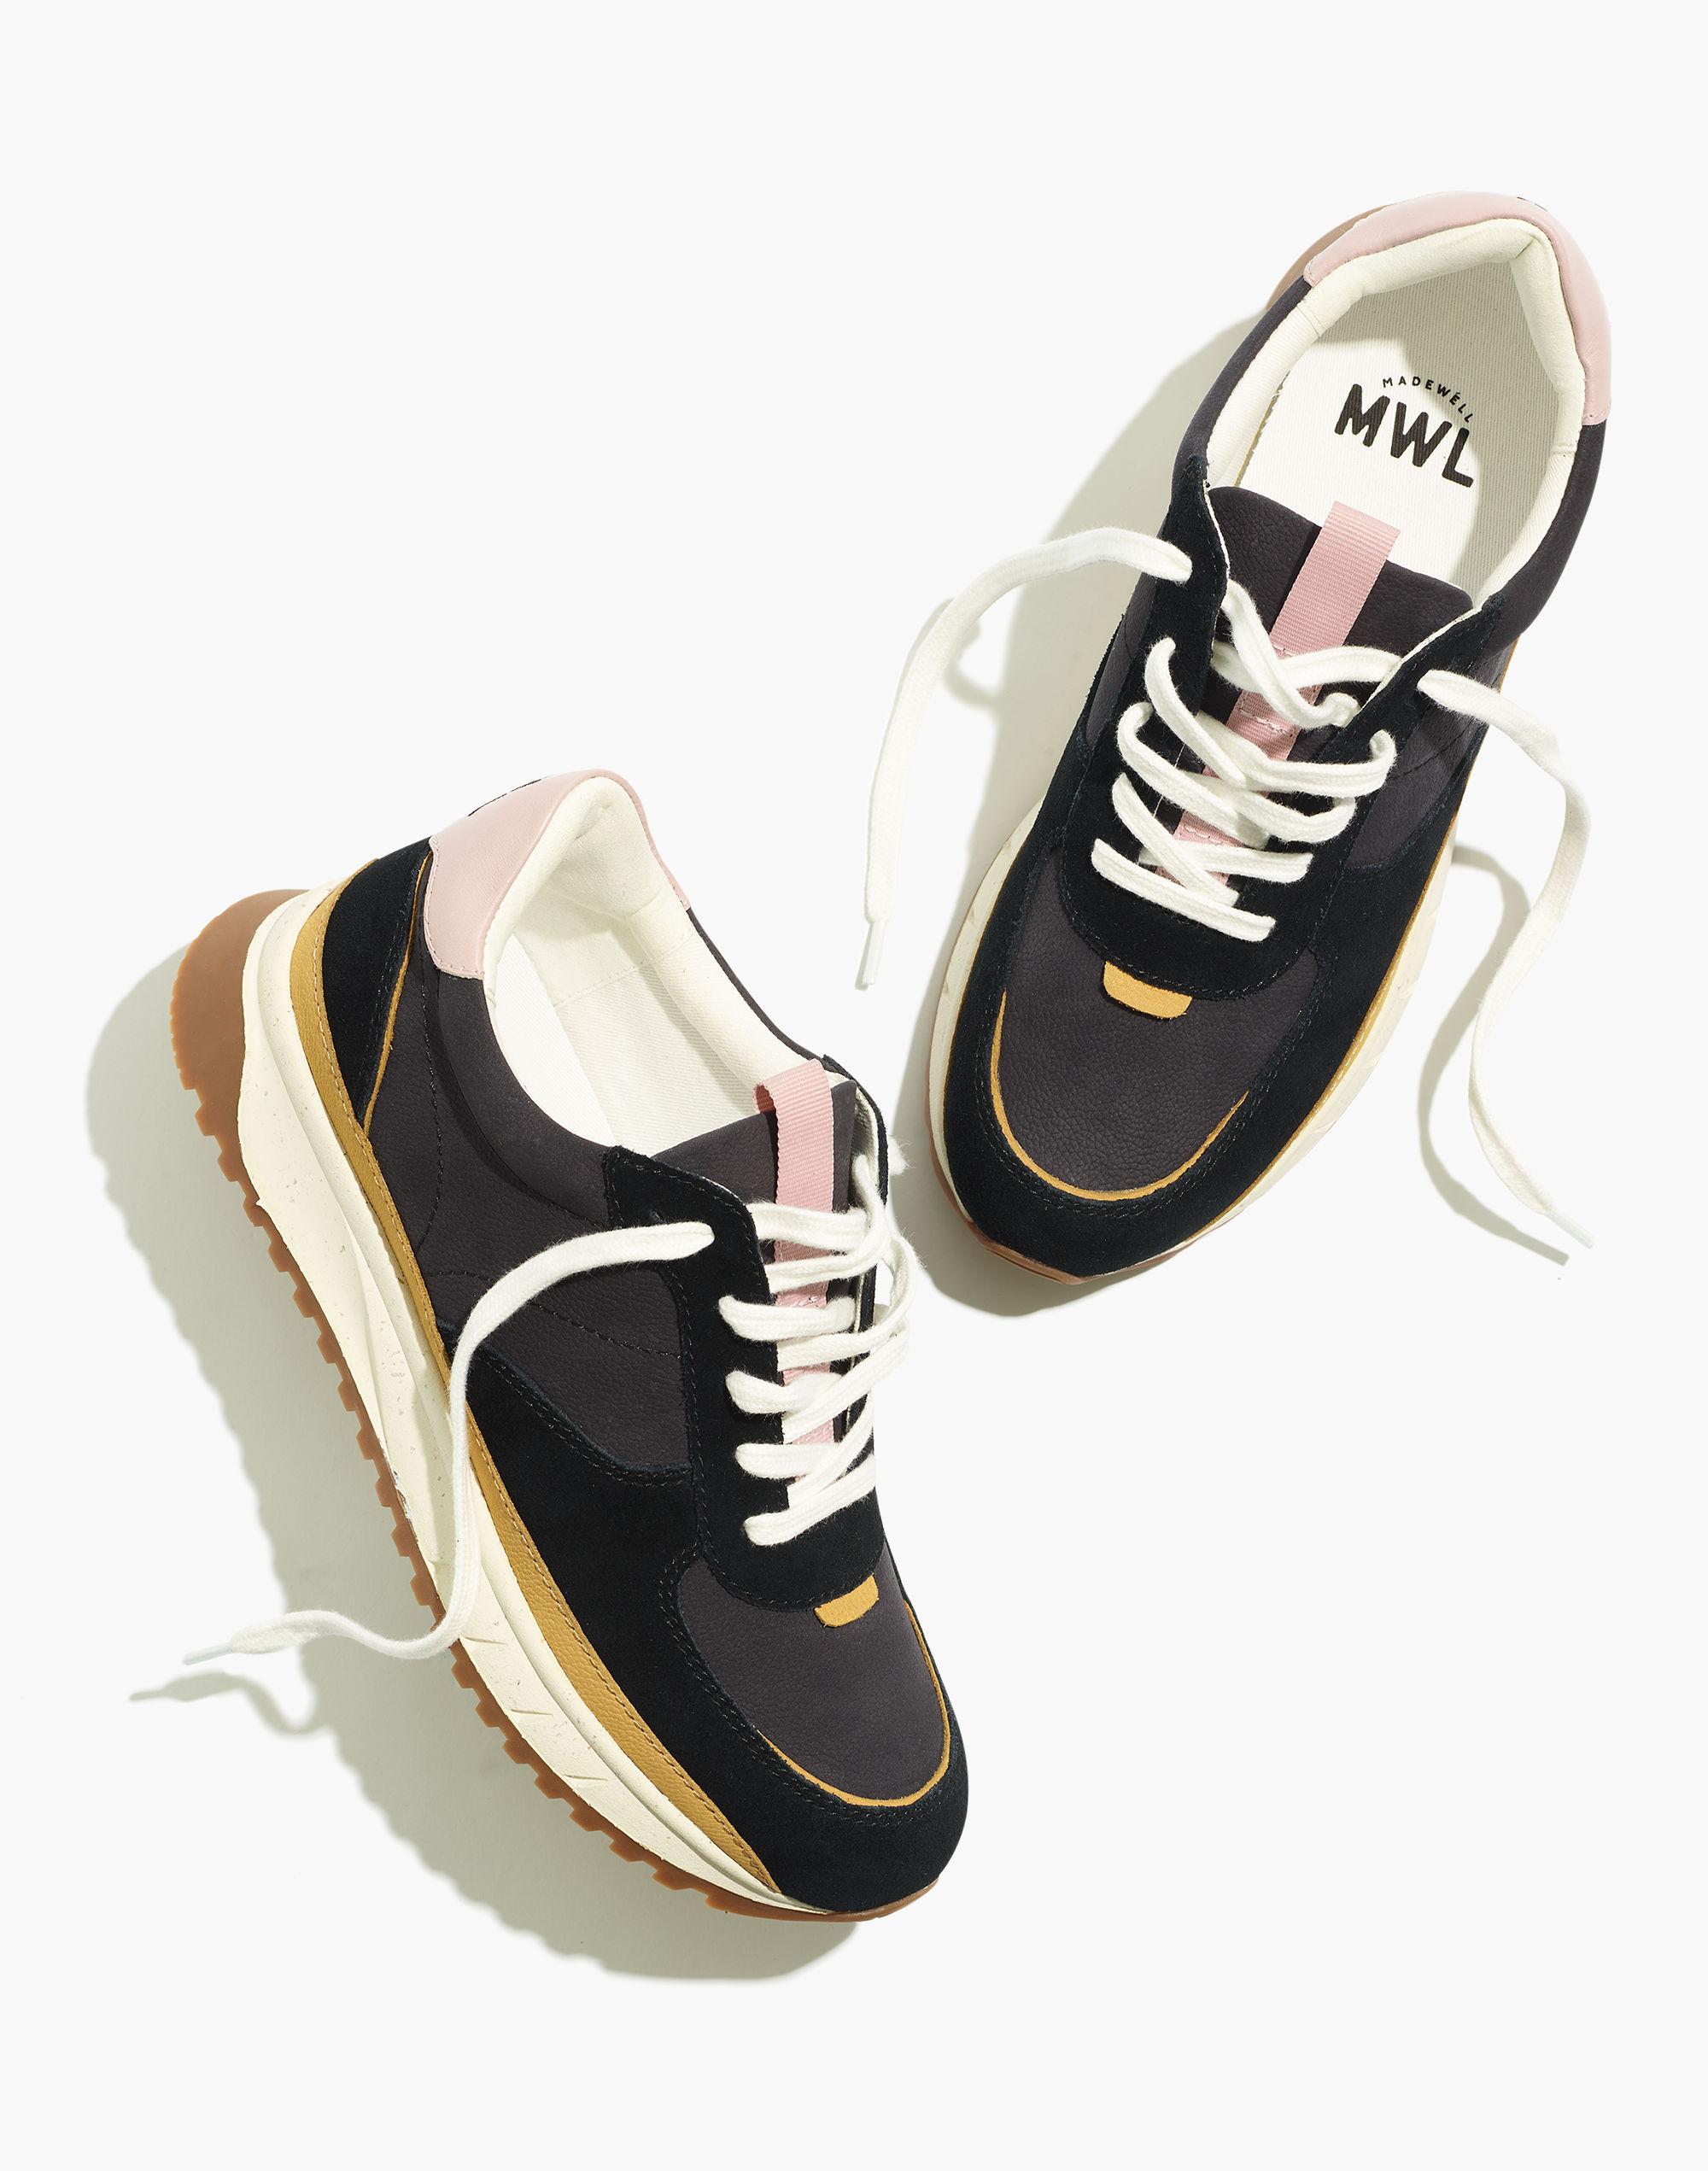 MW Kickoff Trainer Sneakers | Lyst